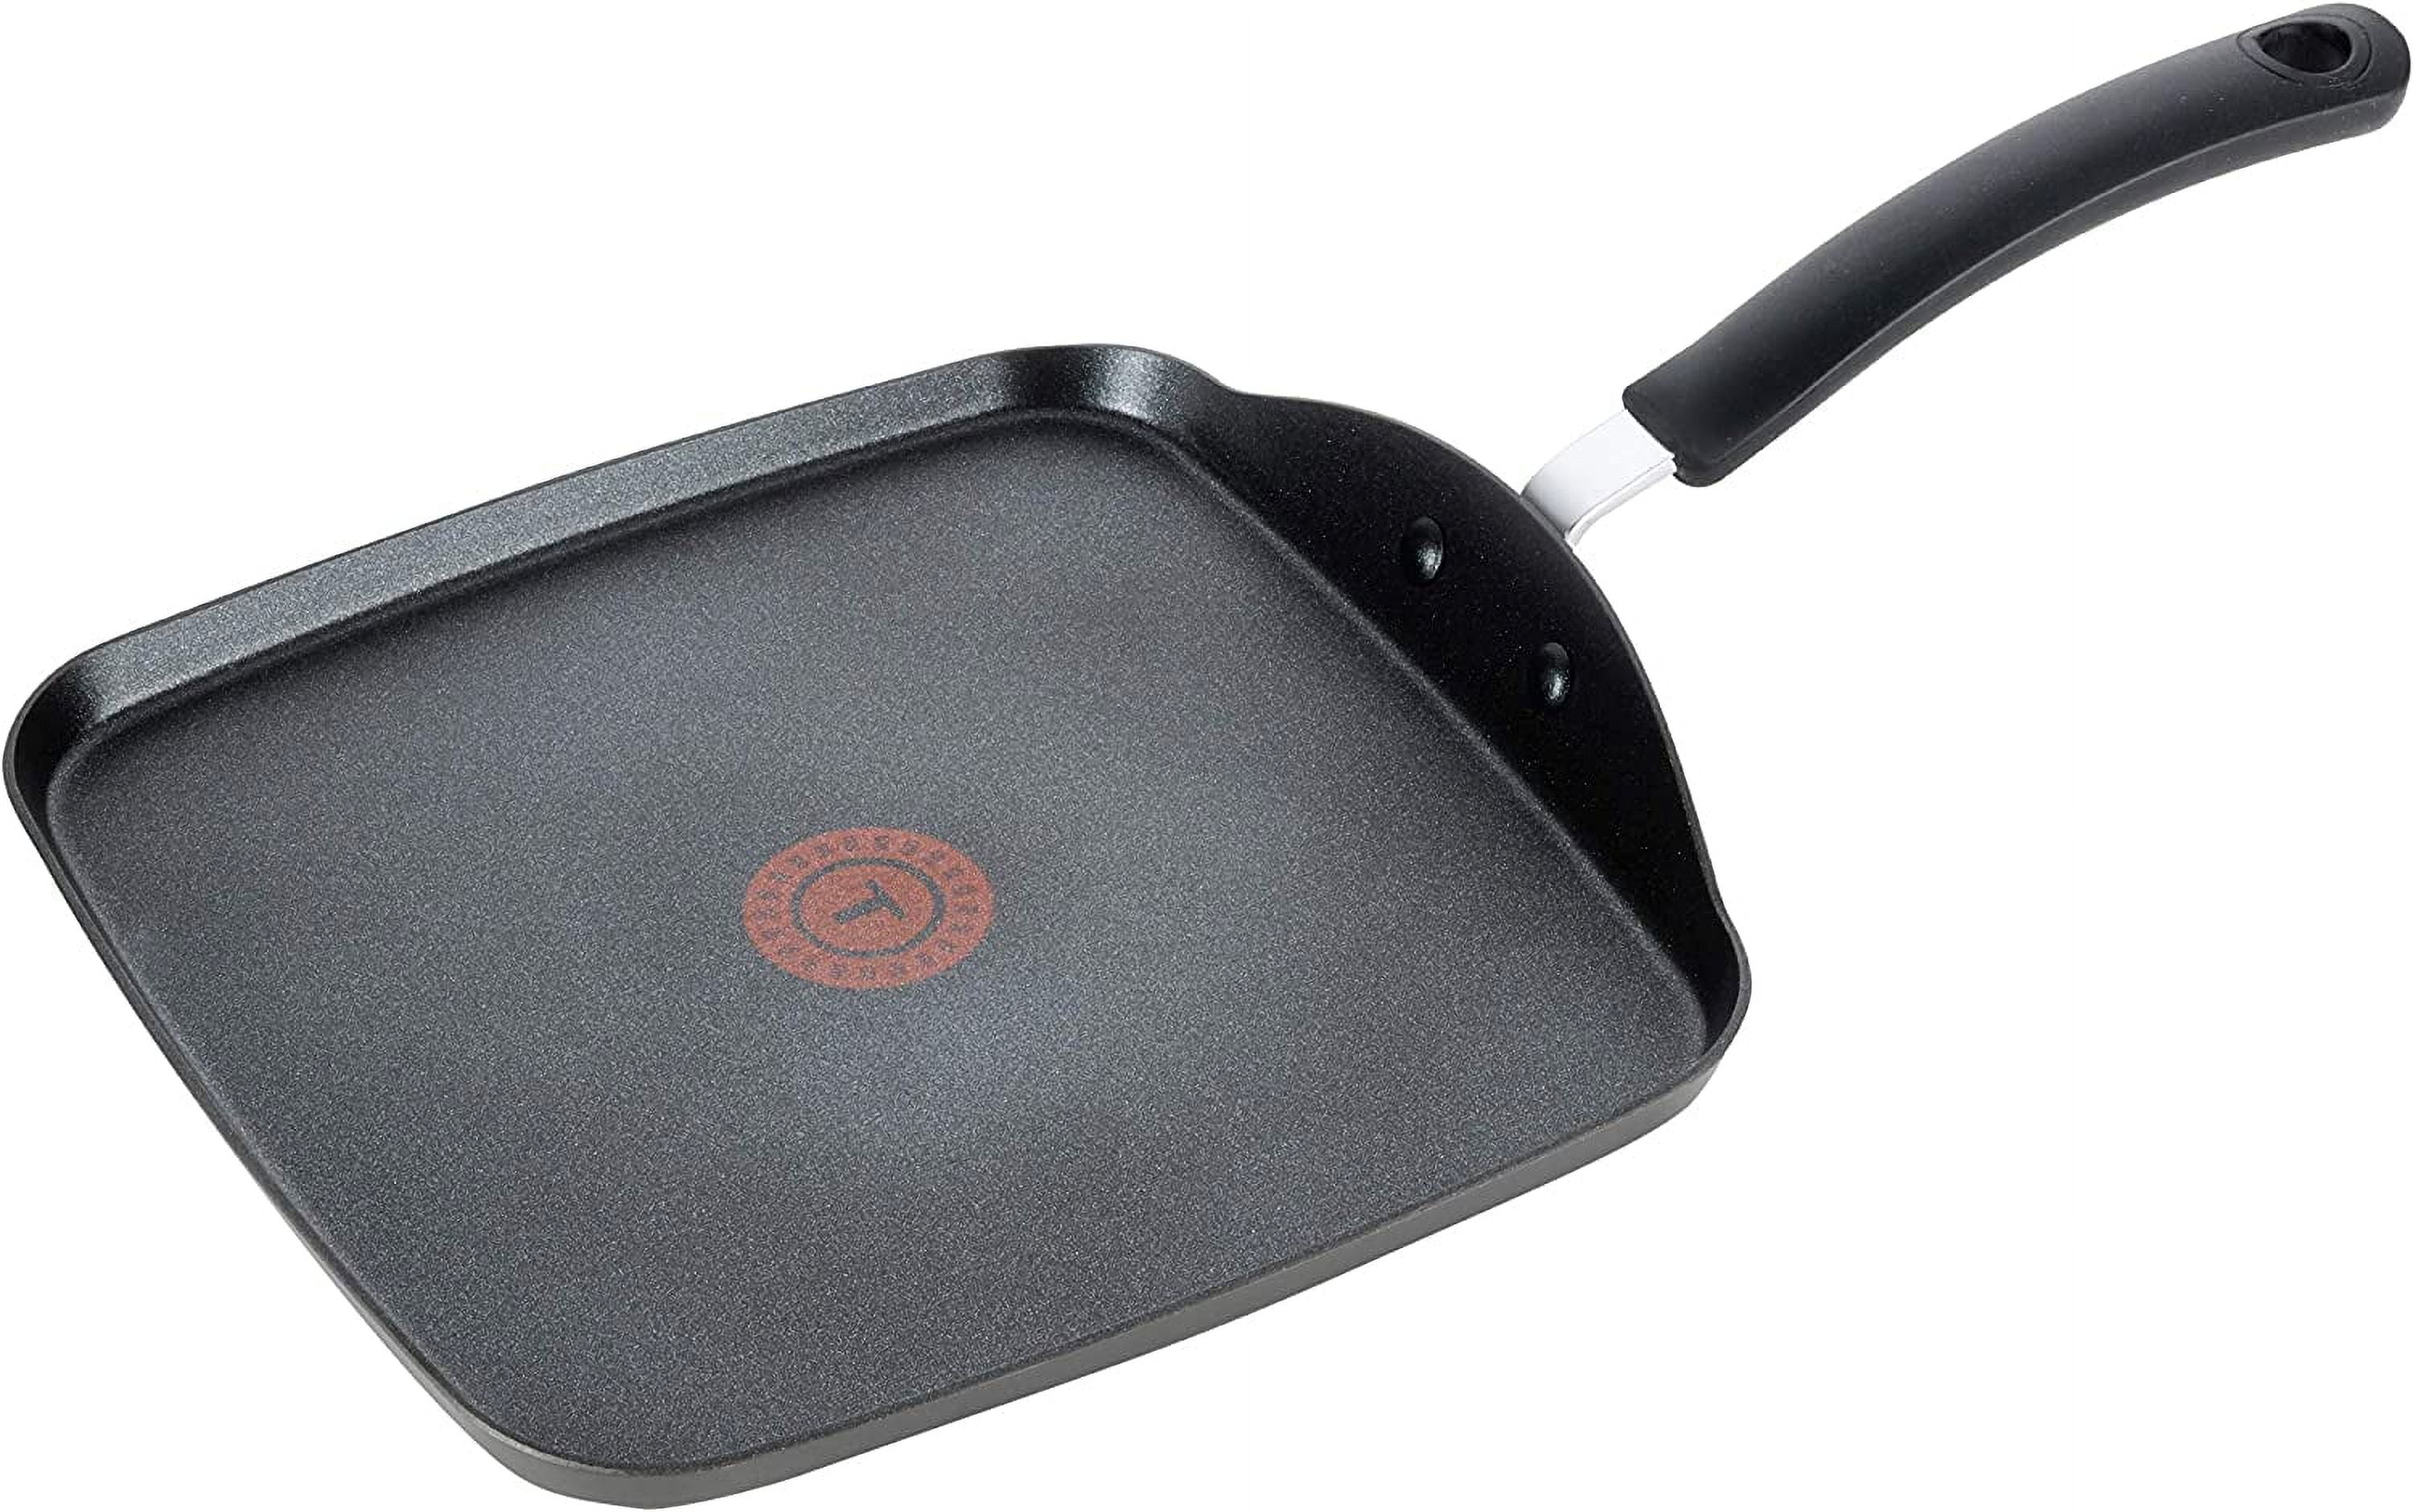  T-fal Specialty Nonstick Mini Griddle 6.5 Inch Cookware, Pots  and Pans, Dishwasher Safe Black: Small Griddle Pan: Home & Kitchen